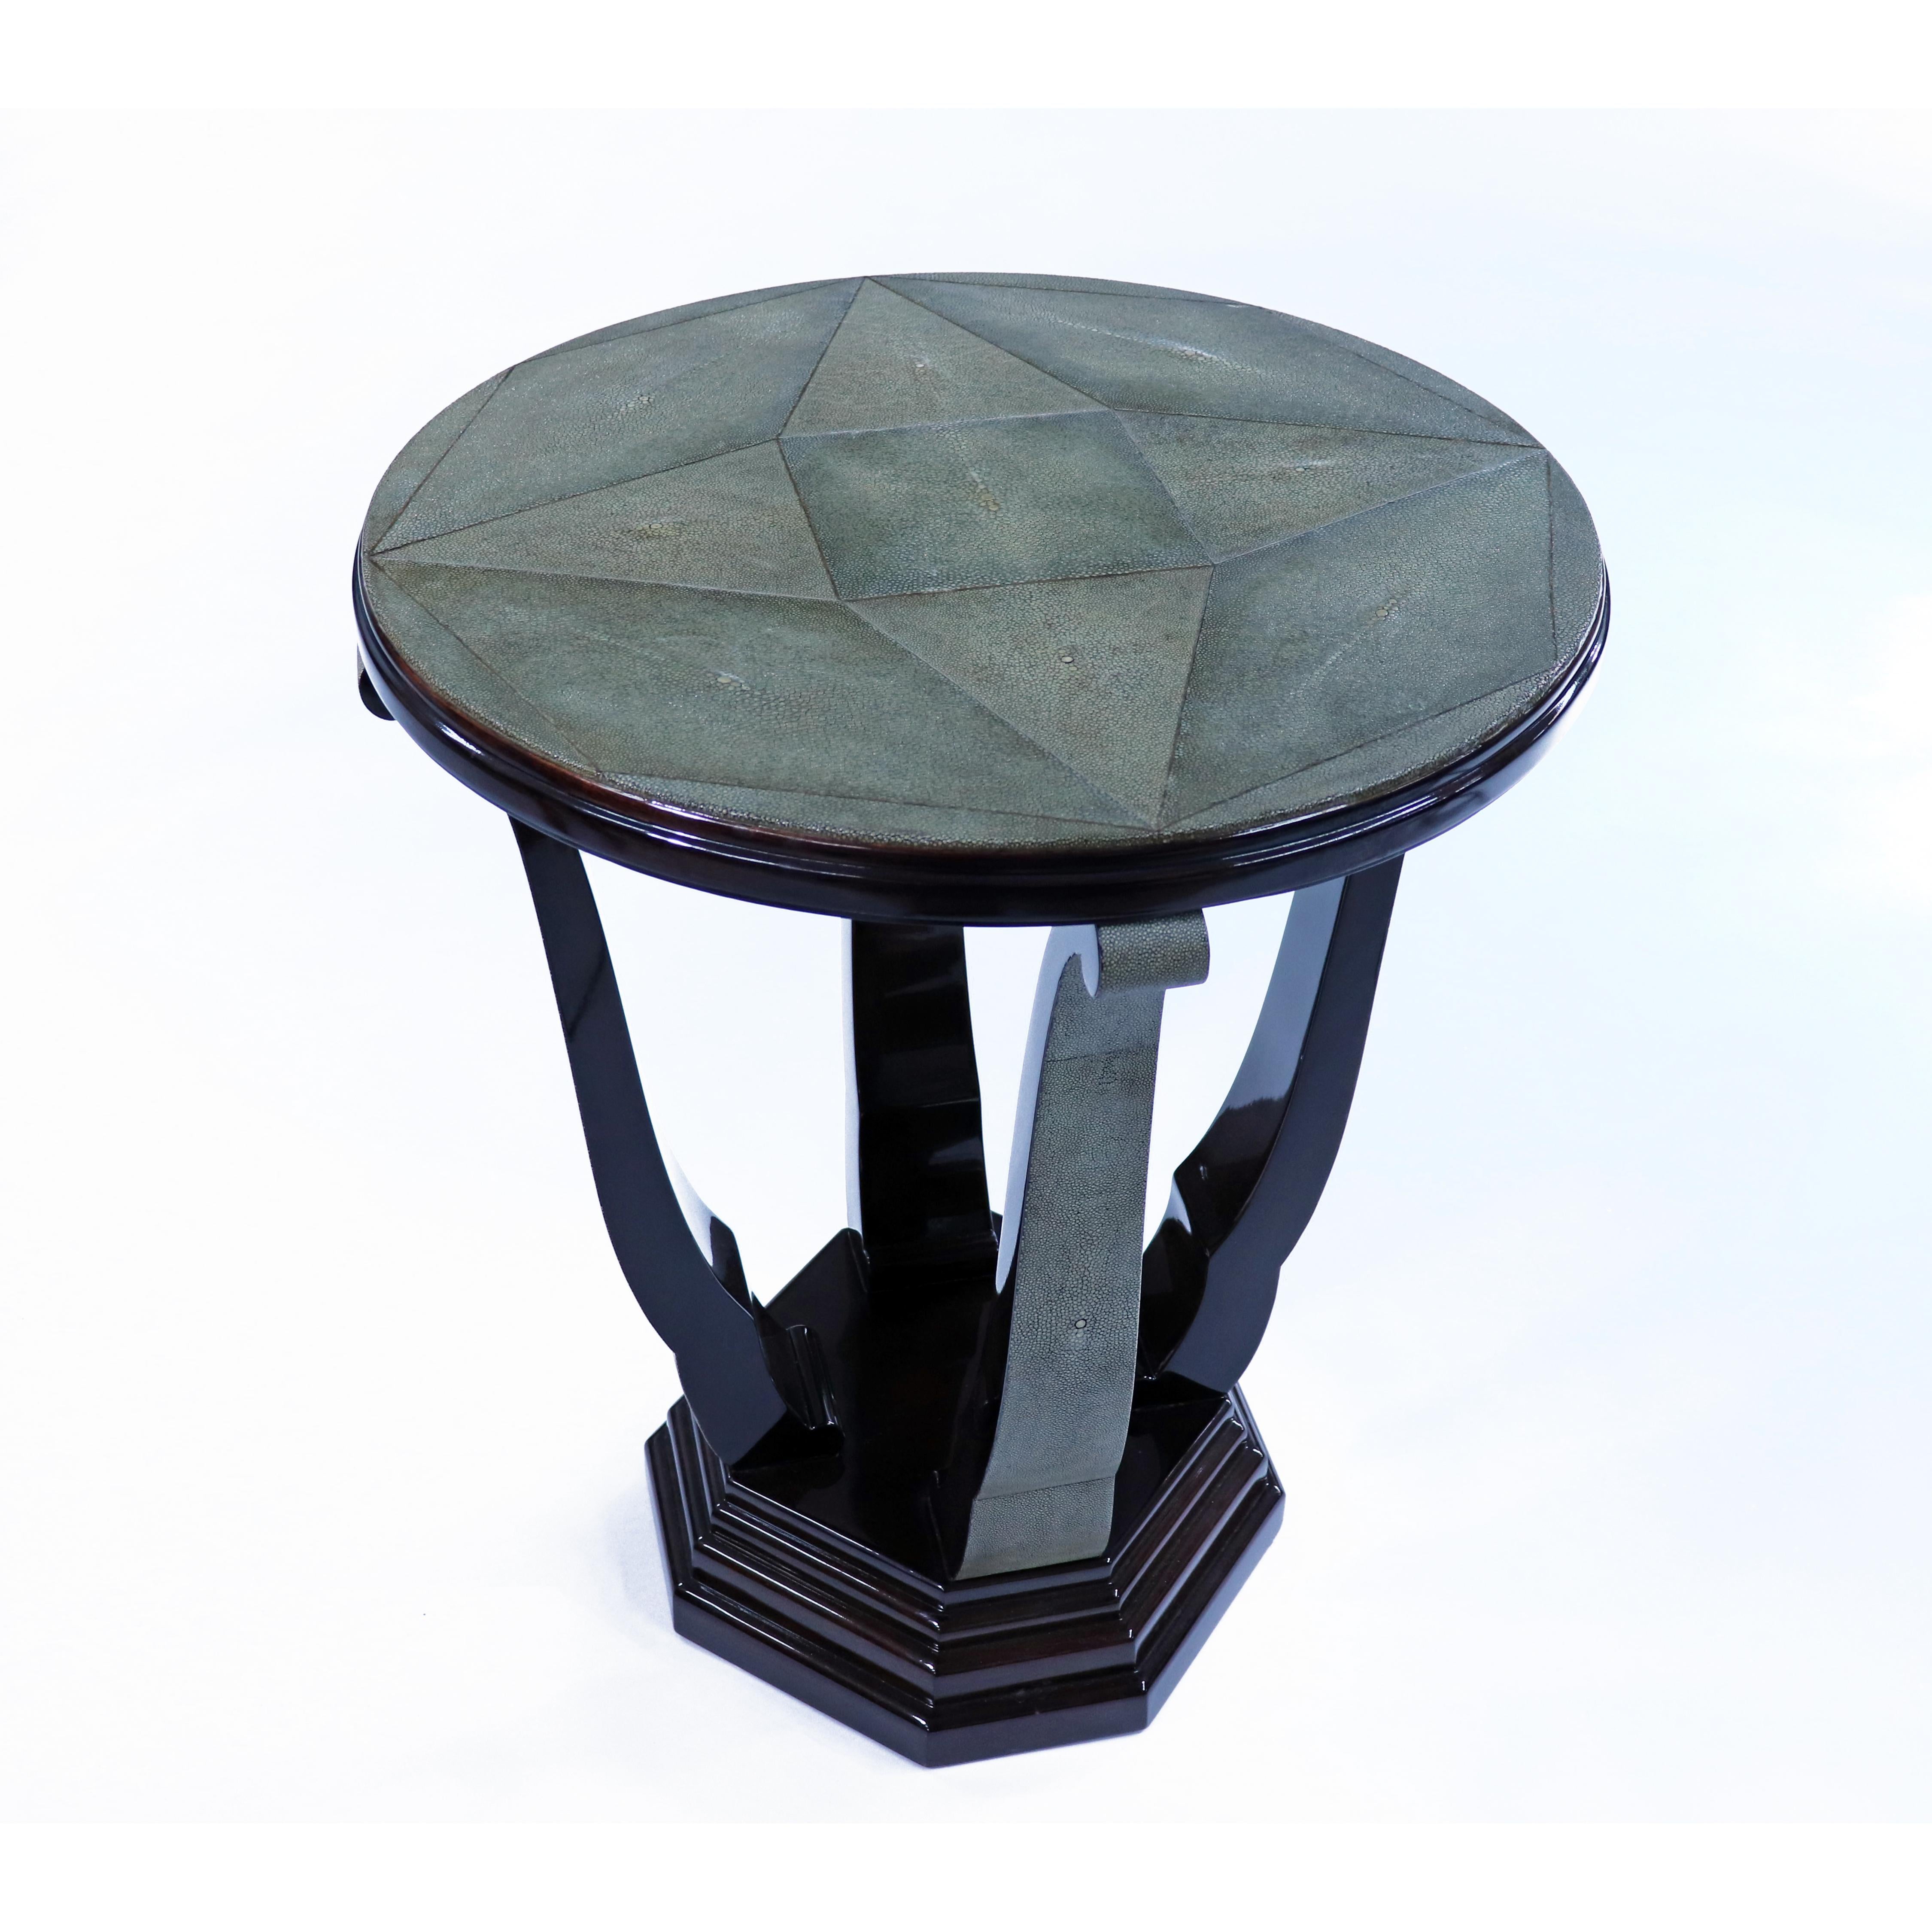 Art Deco entry/side table made out of walnut and shagreen (Galuchat) top and legs details
Made in France 
circa 1930.